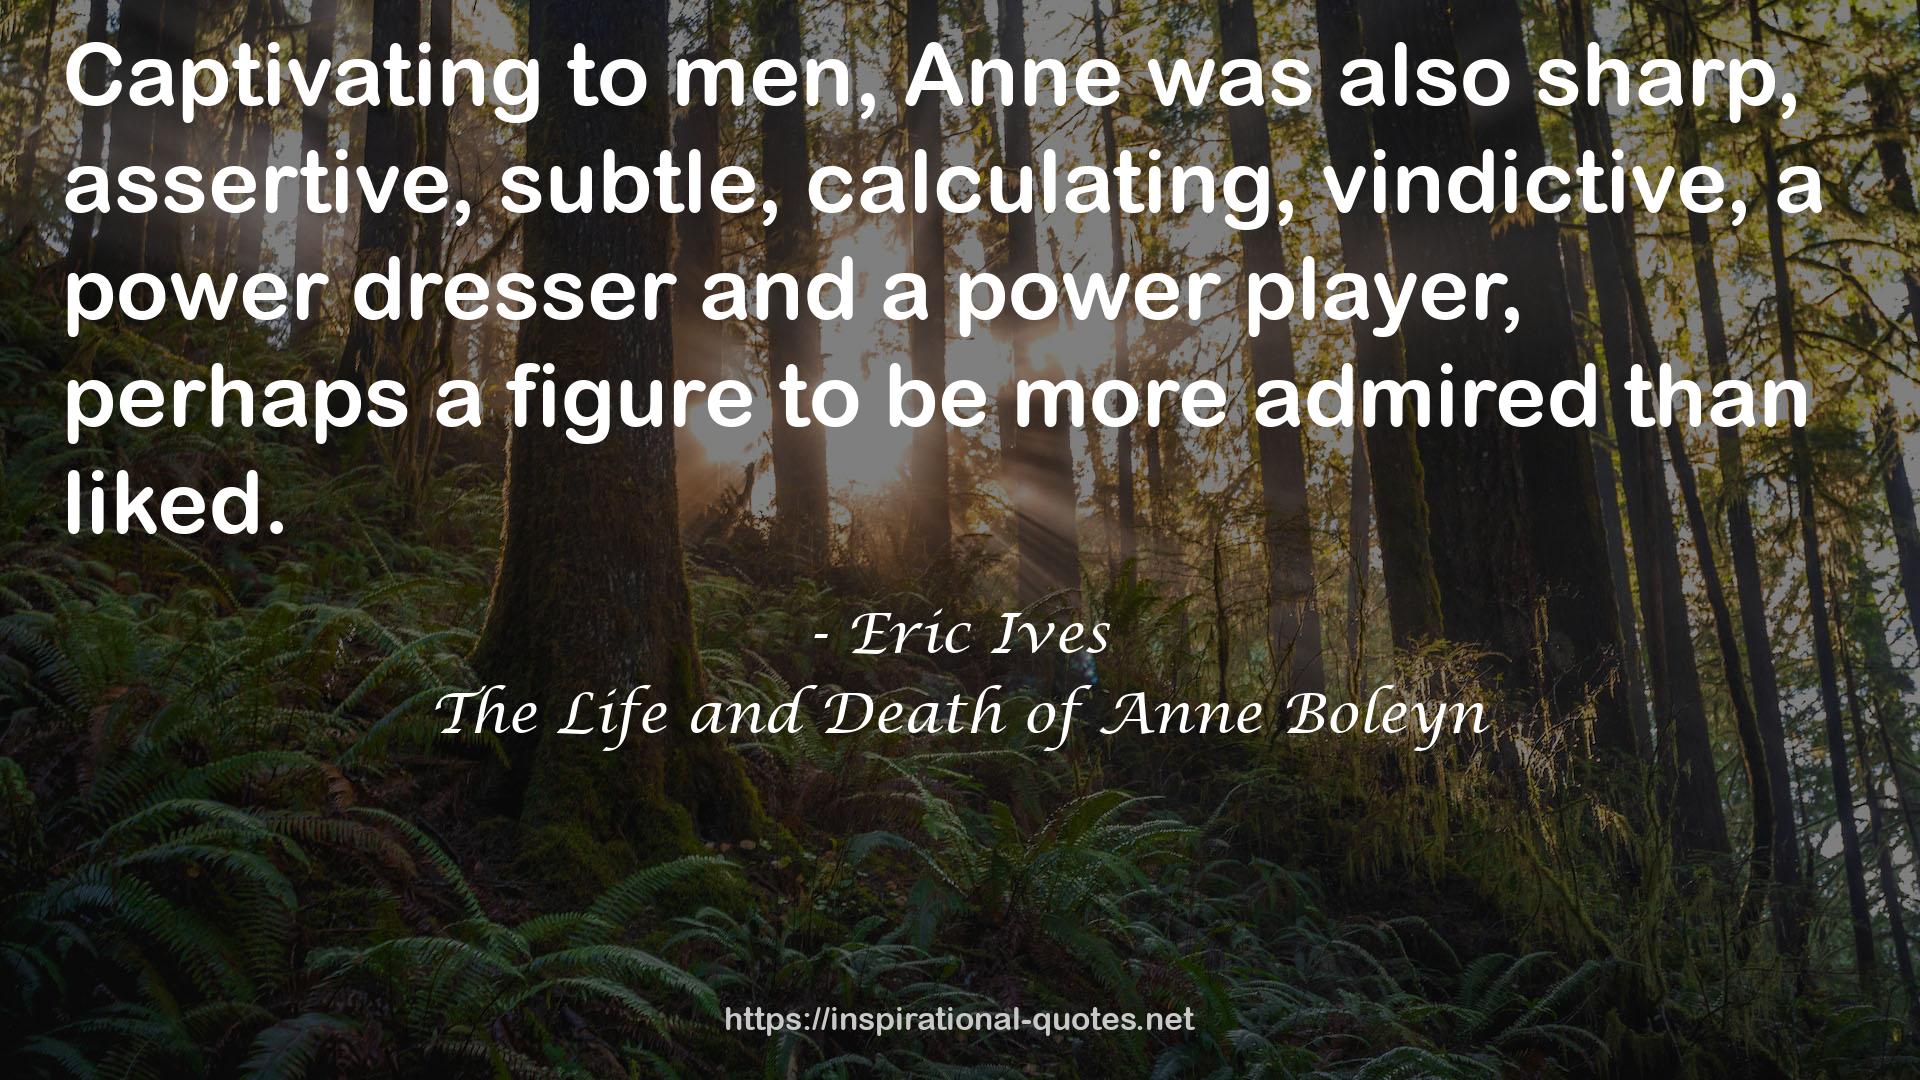 The Life and Death of Anne Boleyn QUOTES